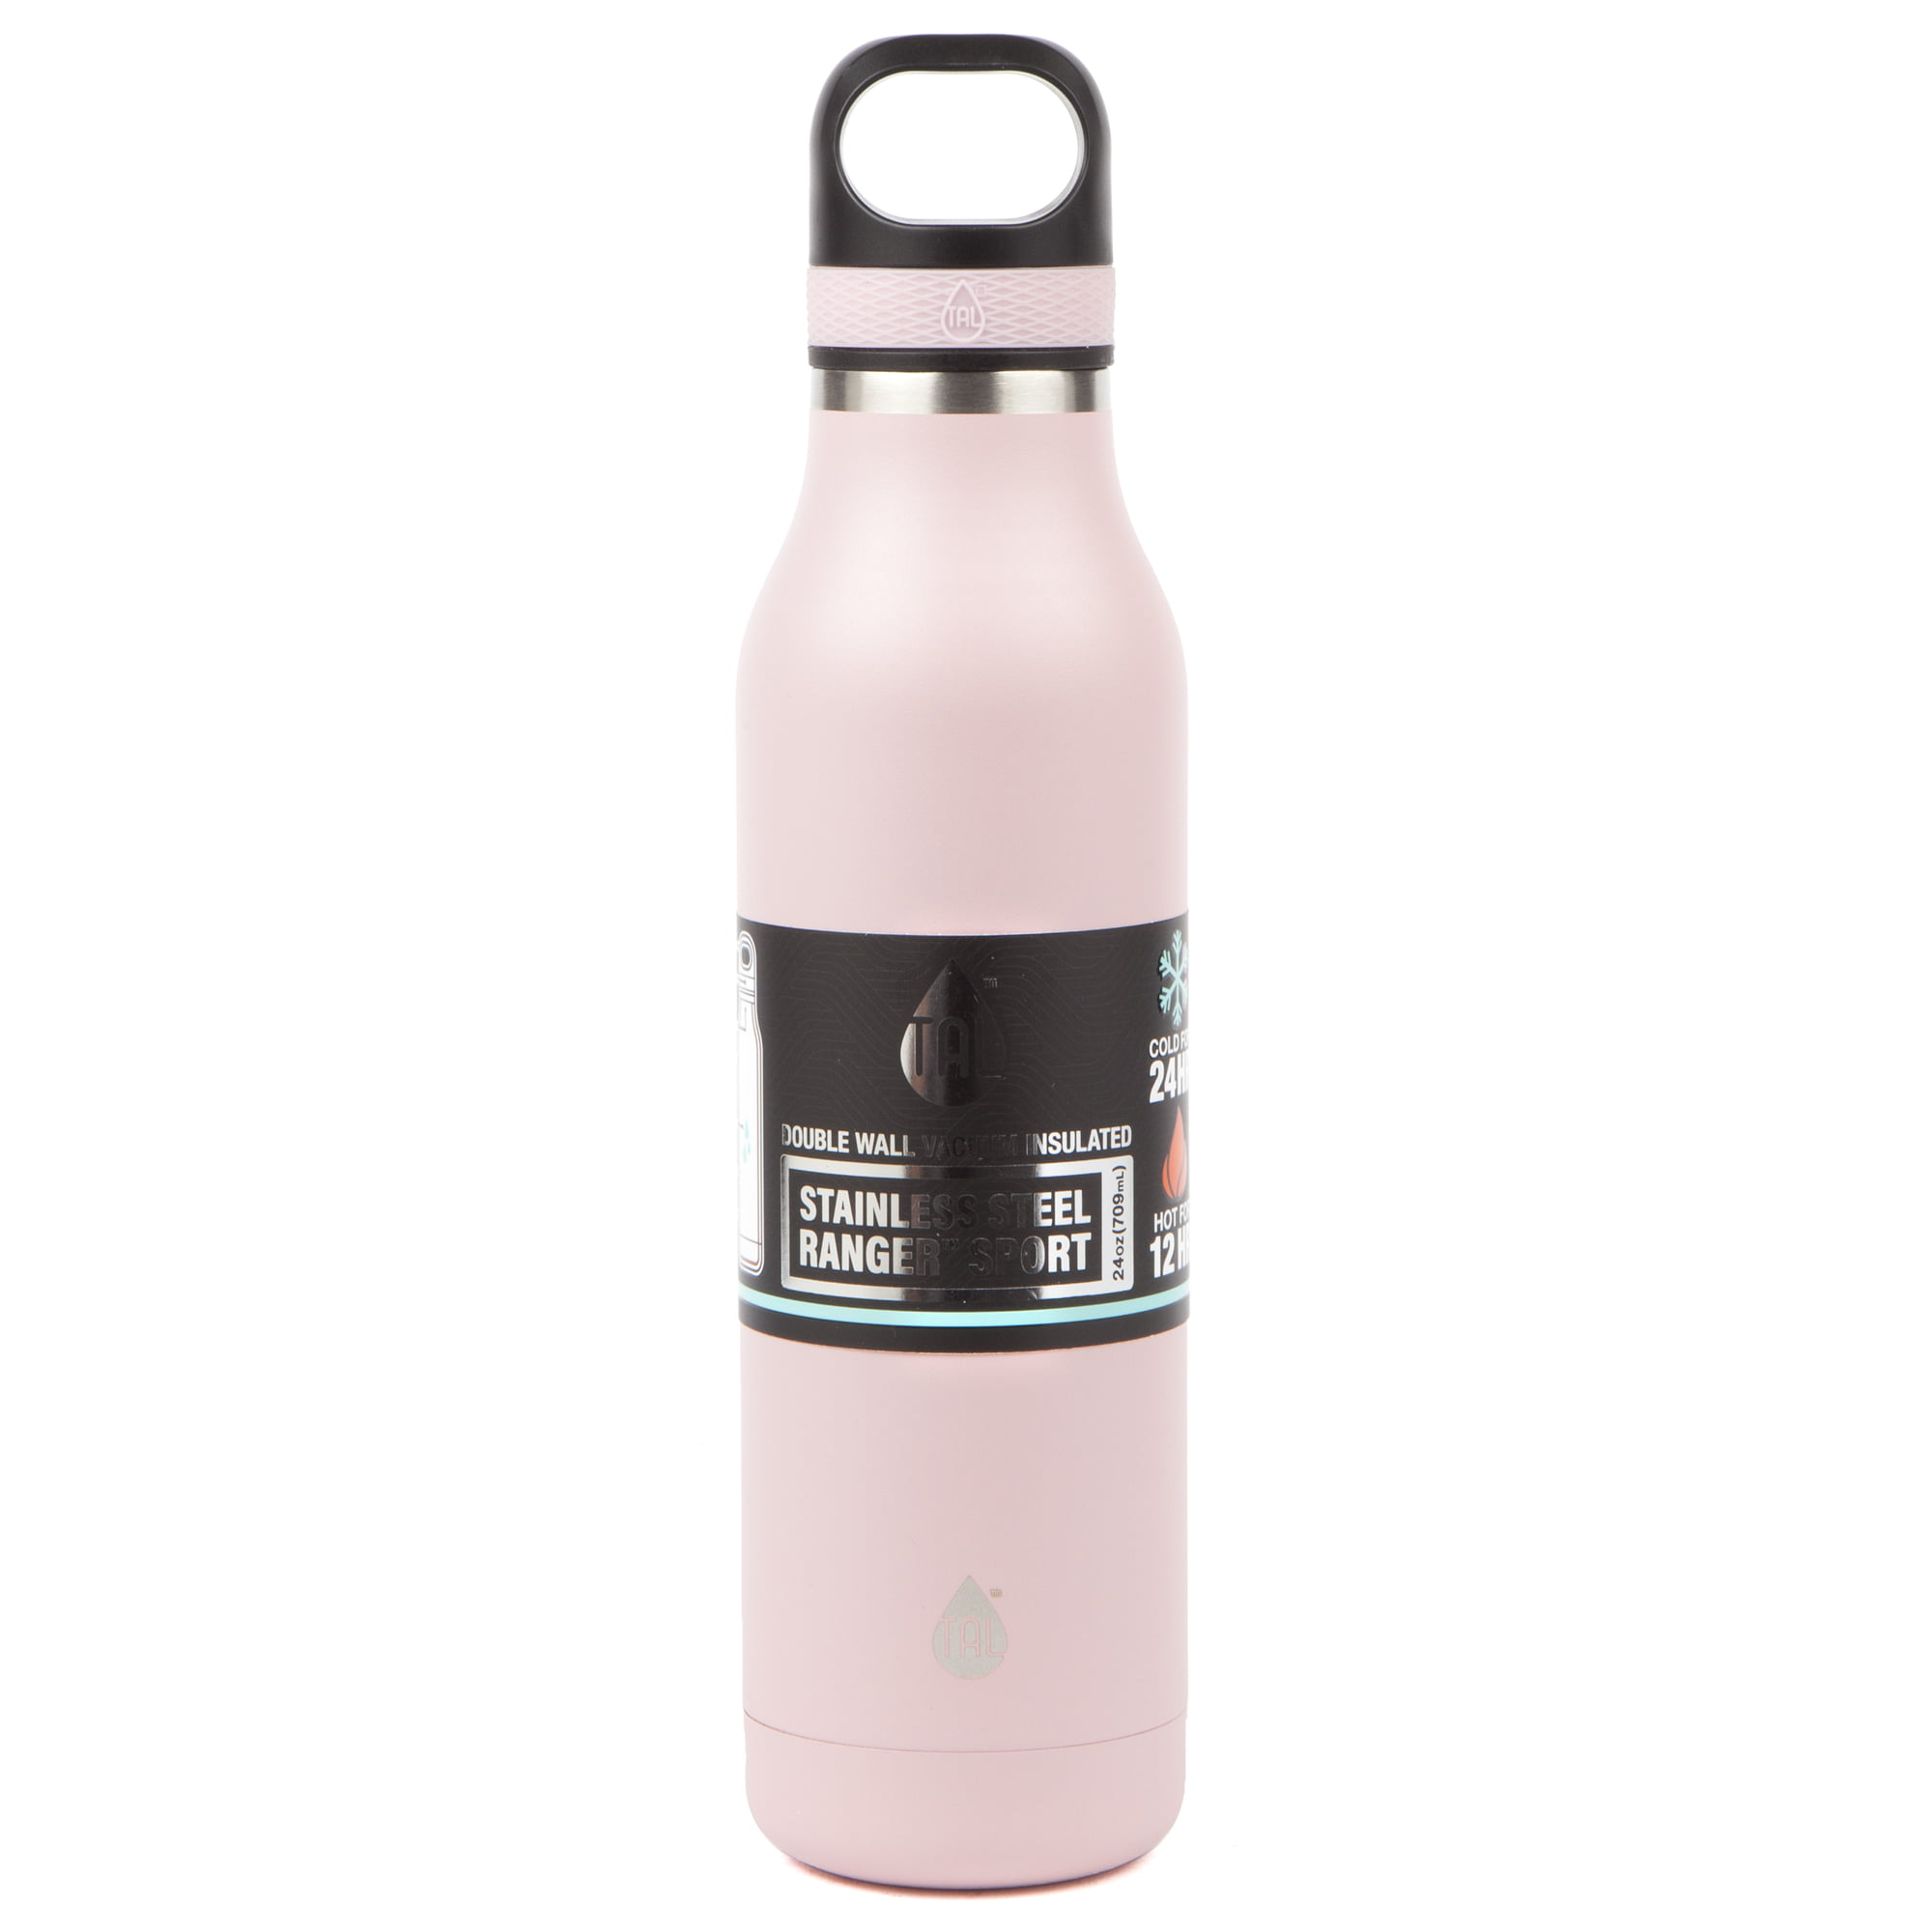 Girl Power 24/7™ Slim Stainless Steel Water Bottle - Exist Loudly